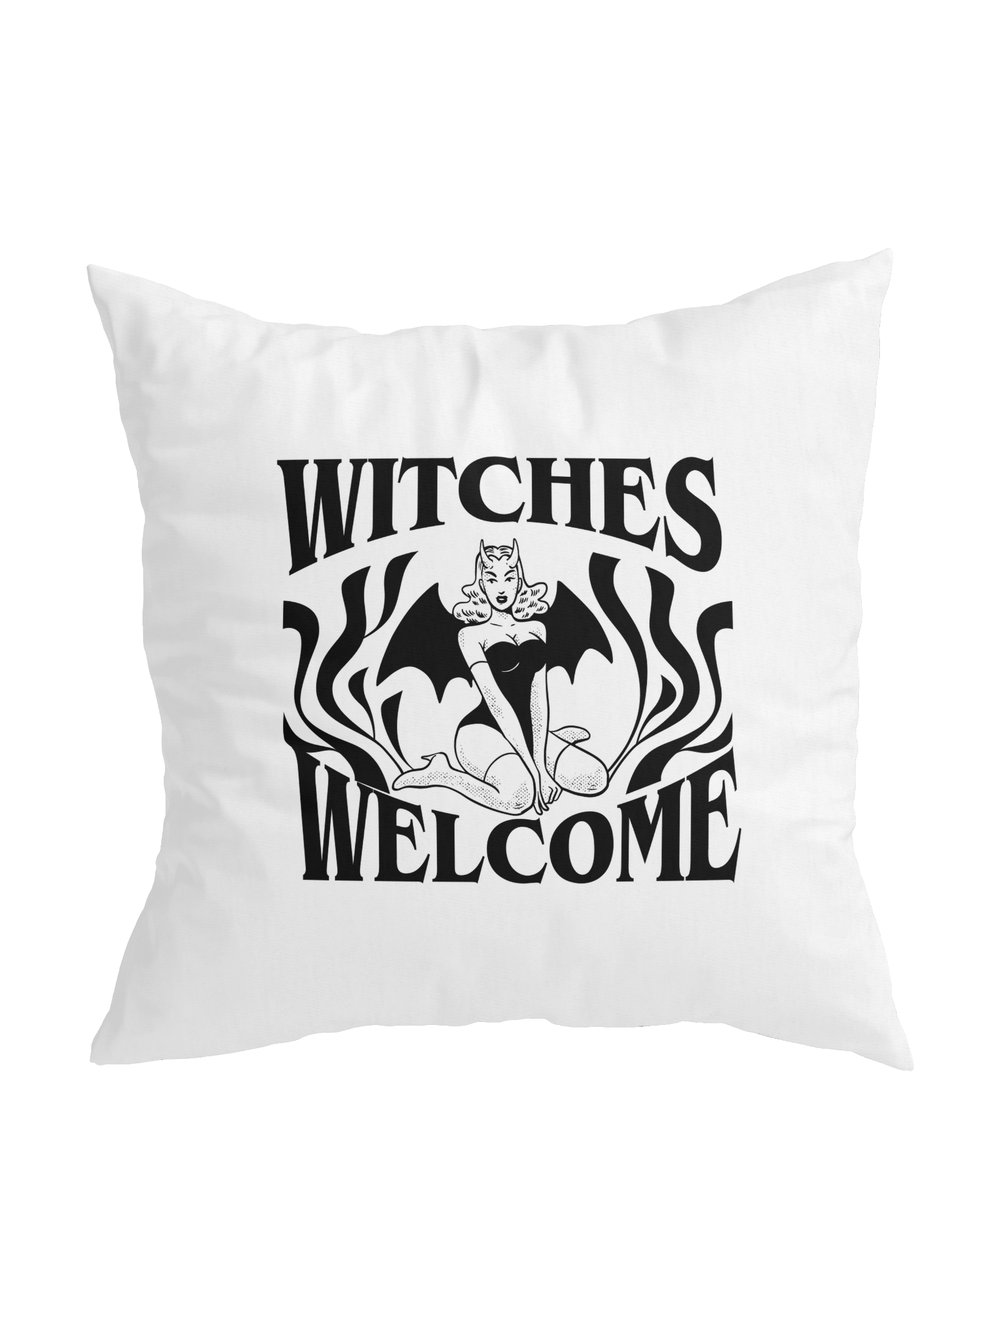 WITCHES WELCOME